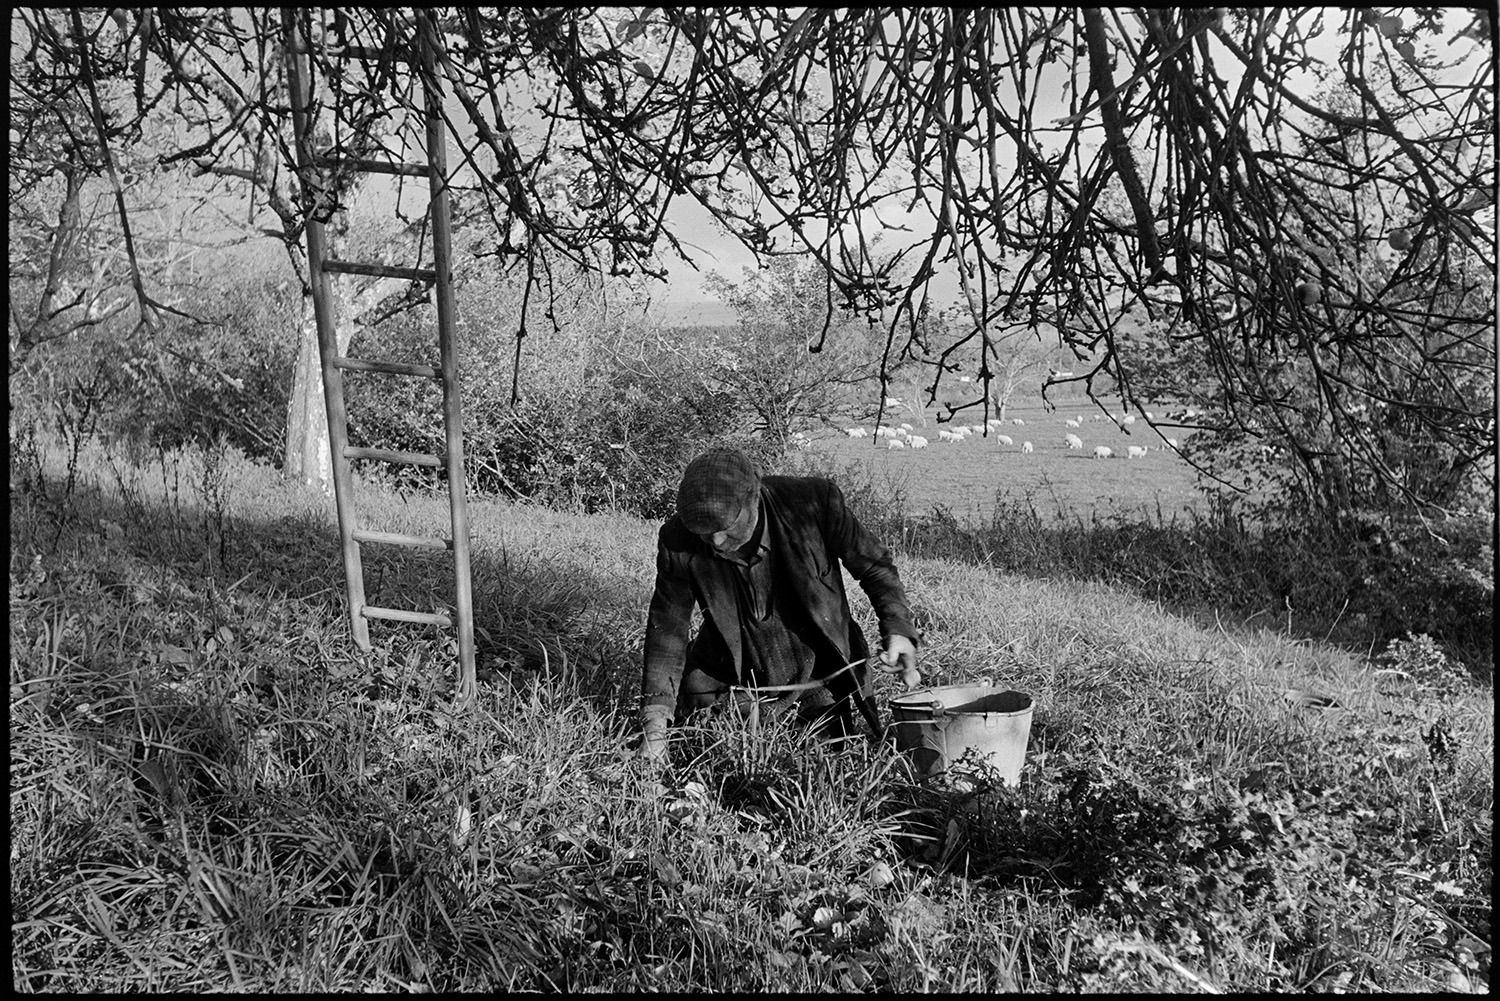 Orchards, Devon, man picking cider apples, up a ladder. 
[Reg Holland picking up fallen cider apples and placing them in a bucket, under a tree in an orchard at Newhouse, Ashreigney. A ladder is propped against the tree and sheep can be seen grazing in a field in the background.]